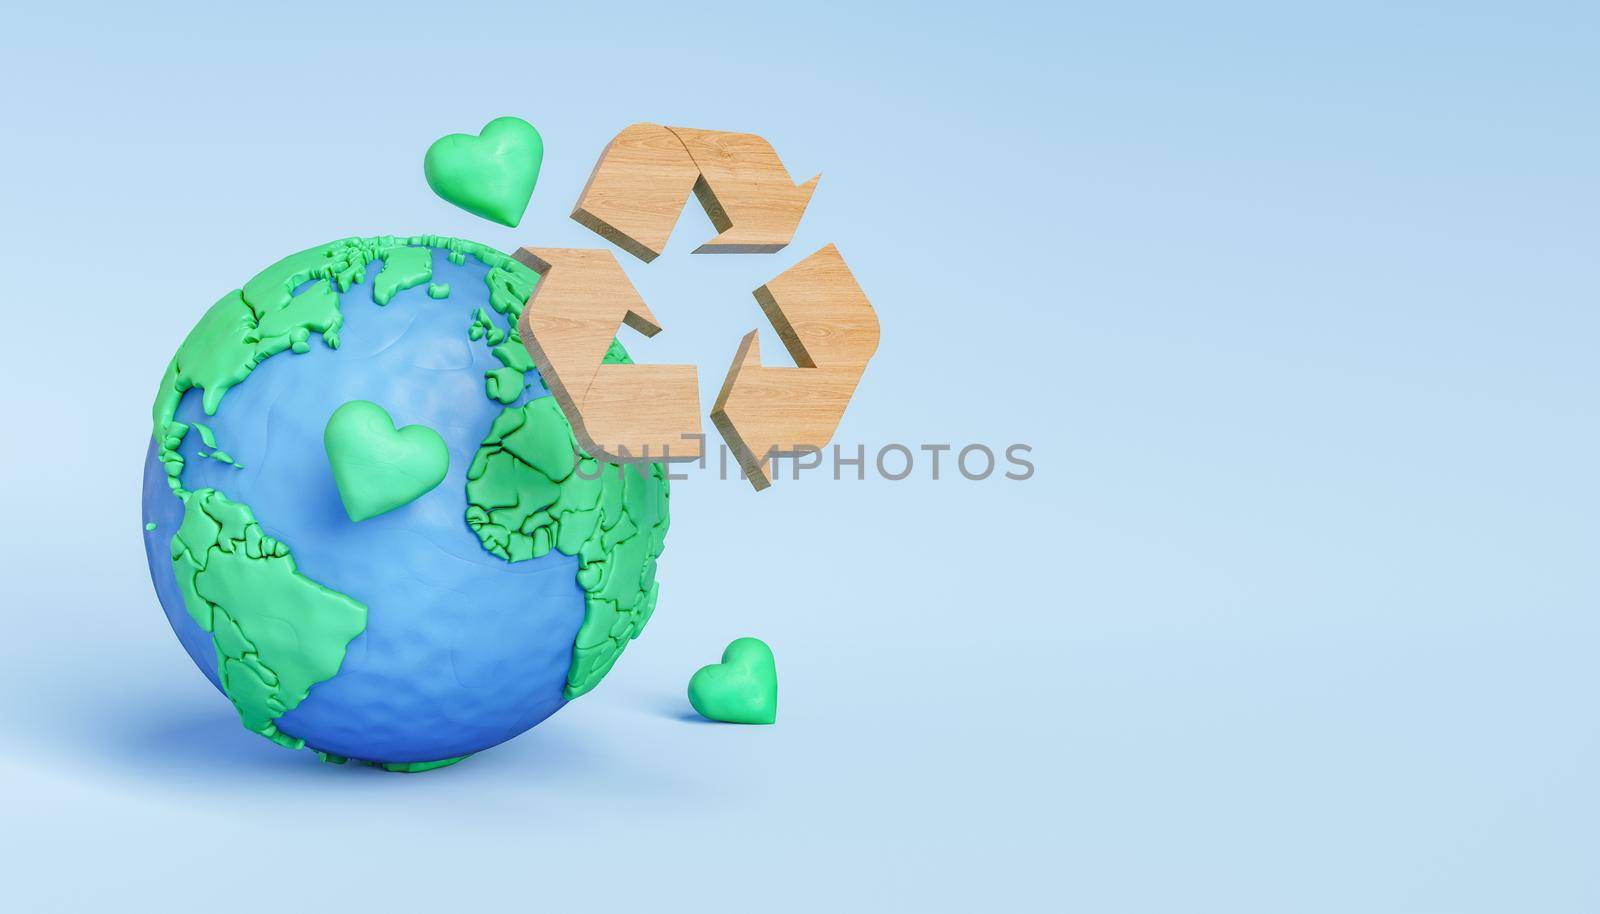 3D illustration of wooden recycling symbol and green hearts near Earth as environment protection concept against blue background